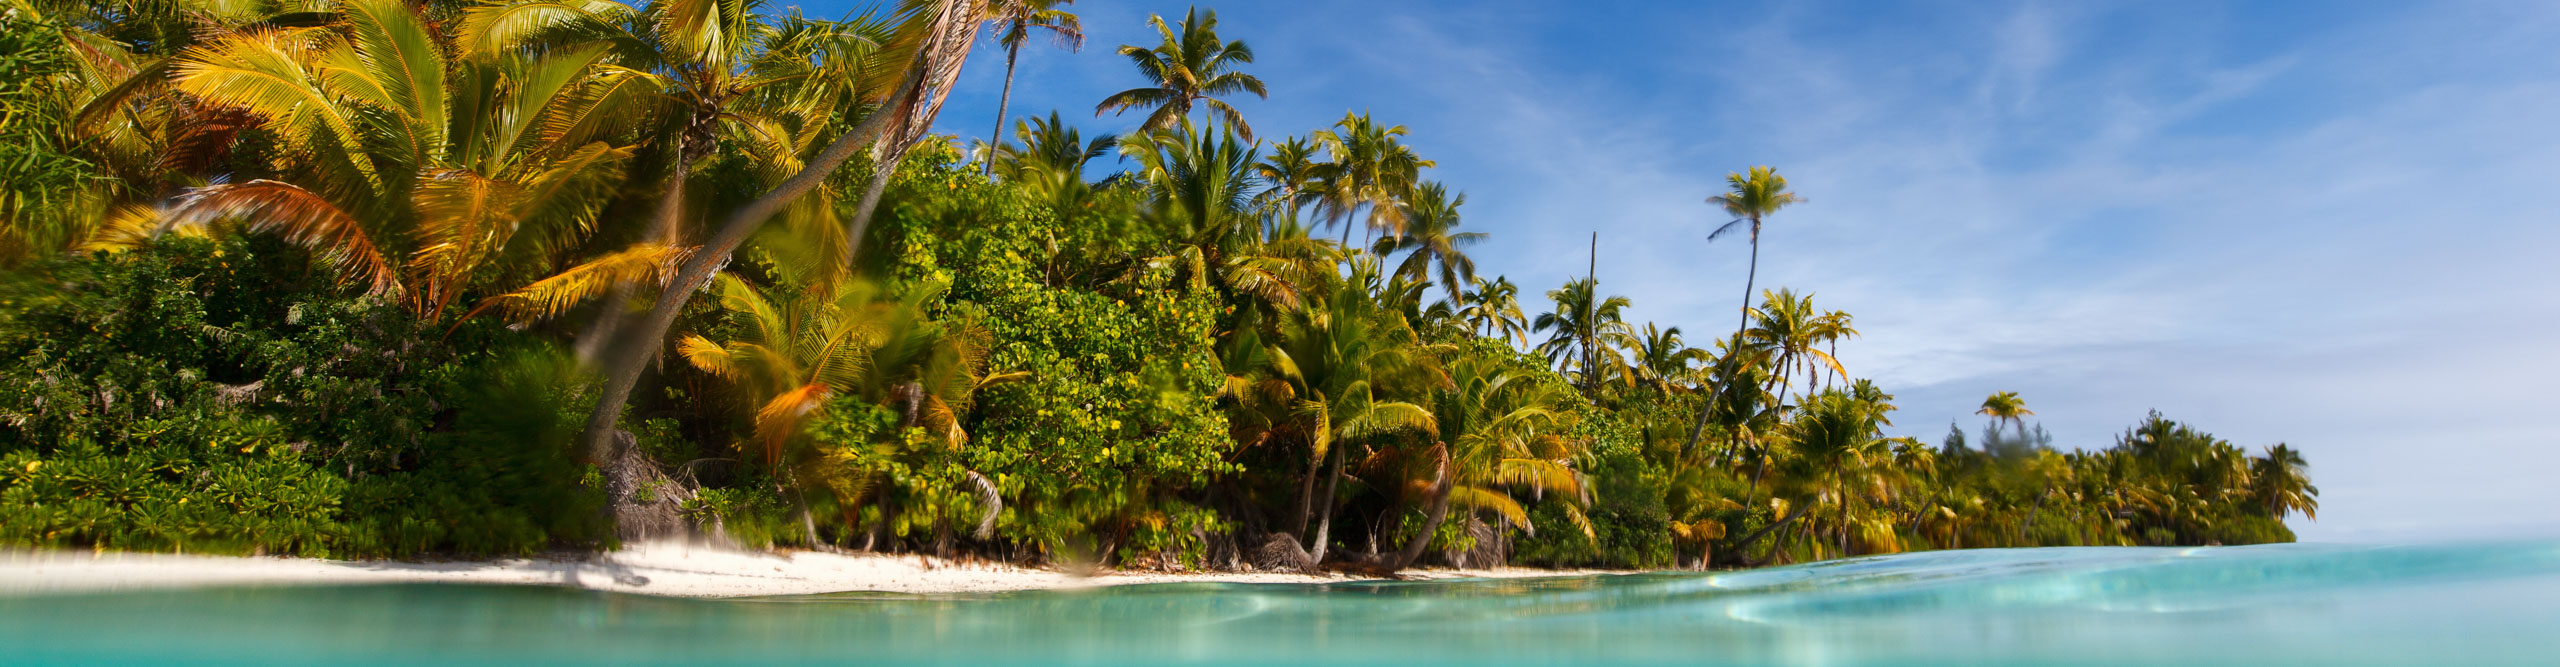 View of beach and palm trees form the water on the beach at Aitutaki, Cook Islands 